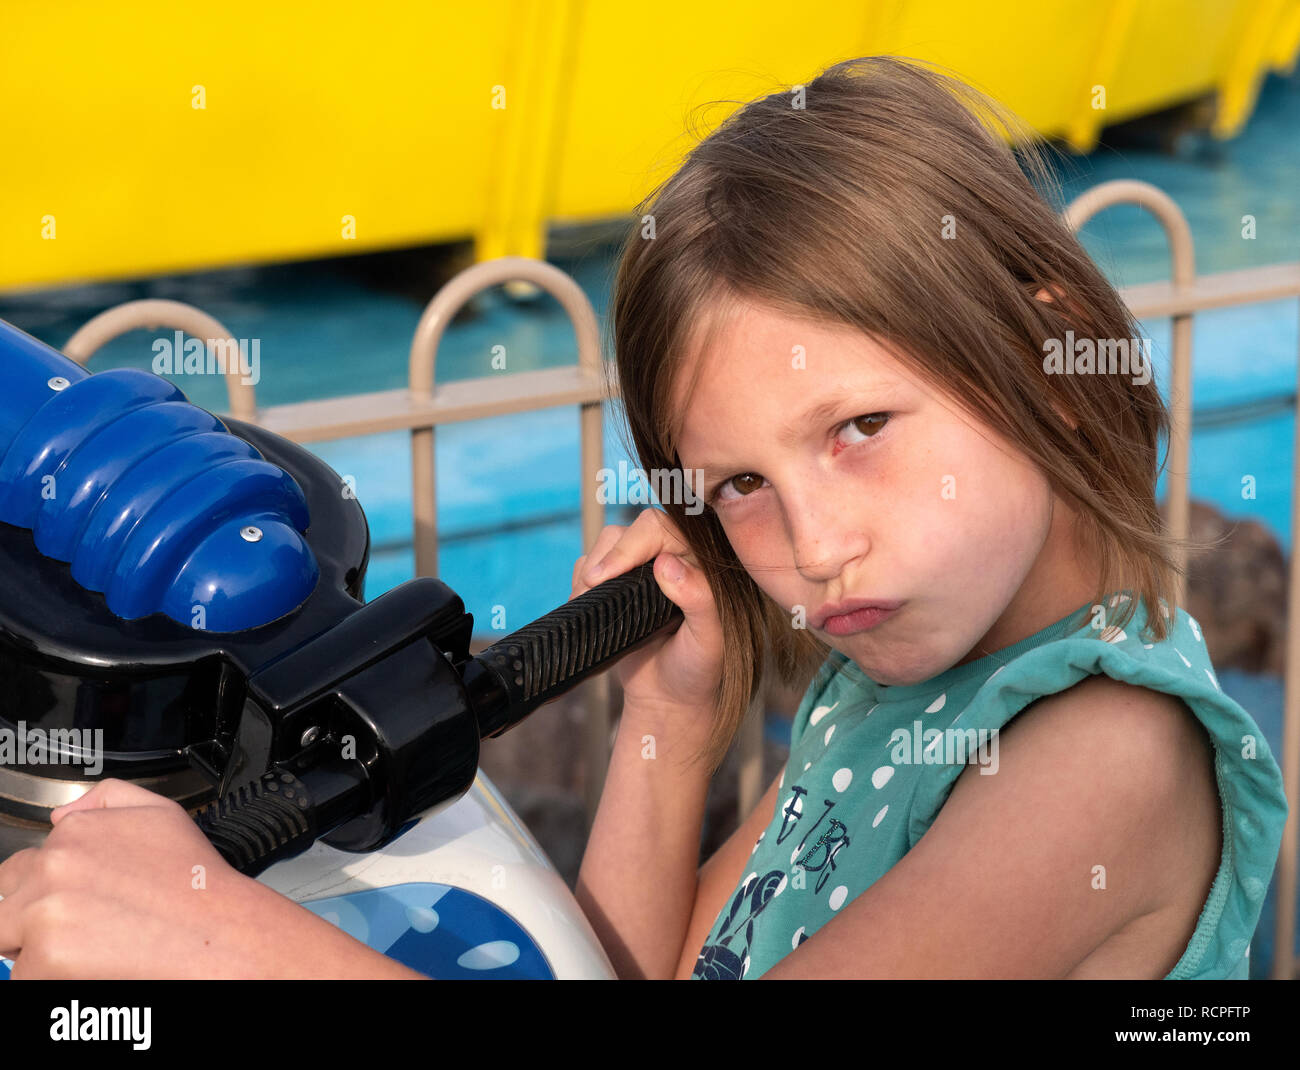 7 year old girl posing for camera with a water gun at a pleasure park. Stock Photo